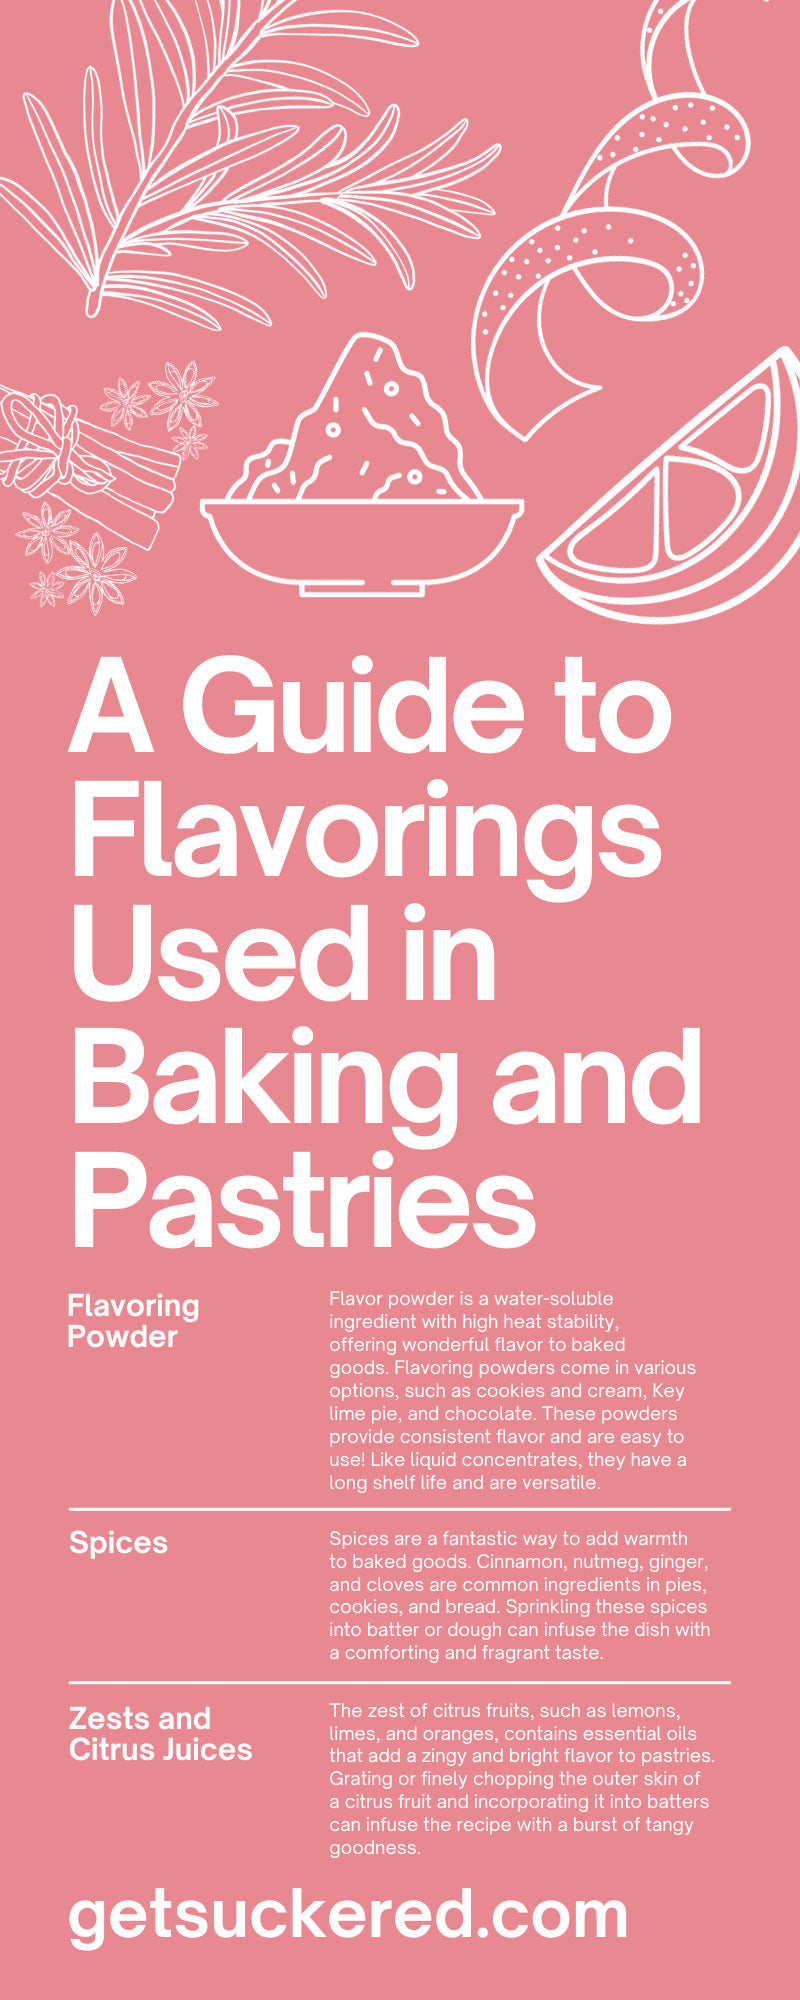 A Guide to Flavorings Used in Baking and Pastries